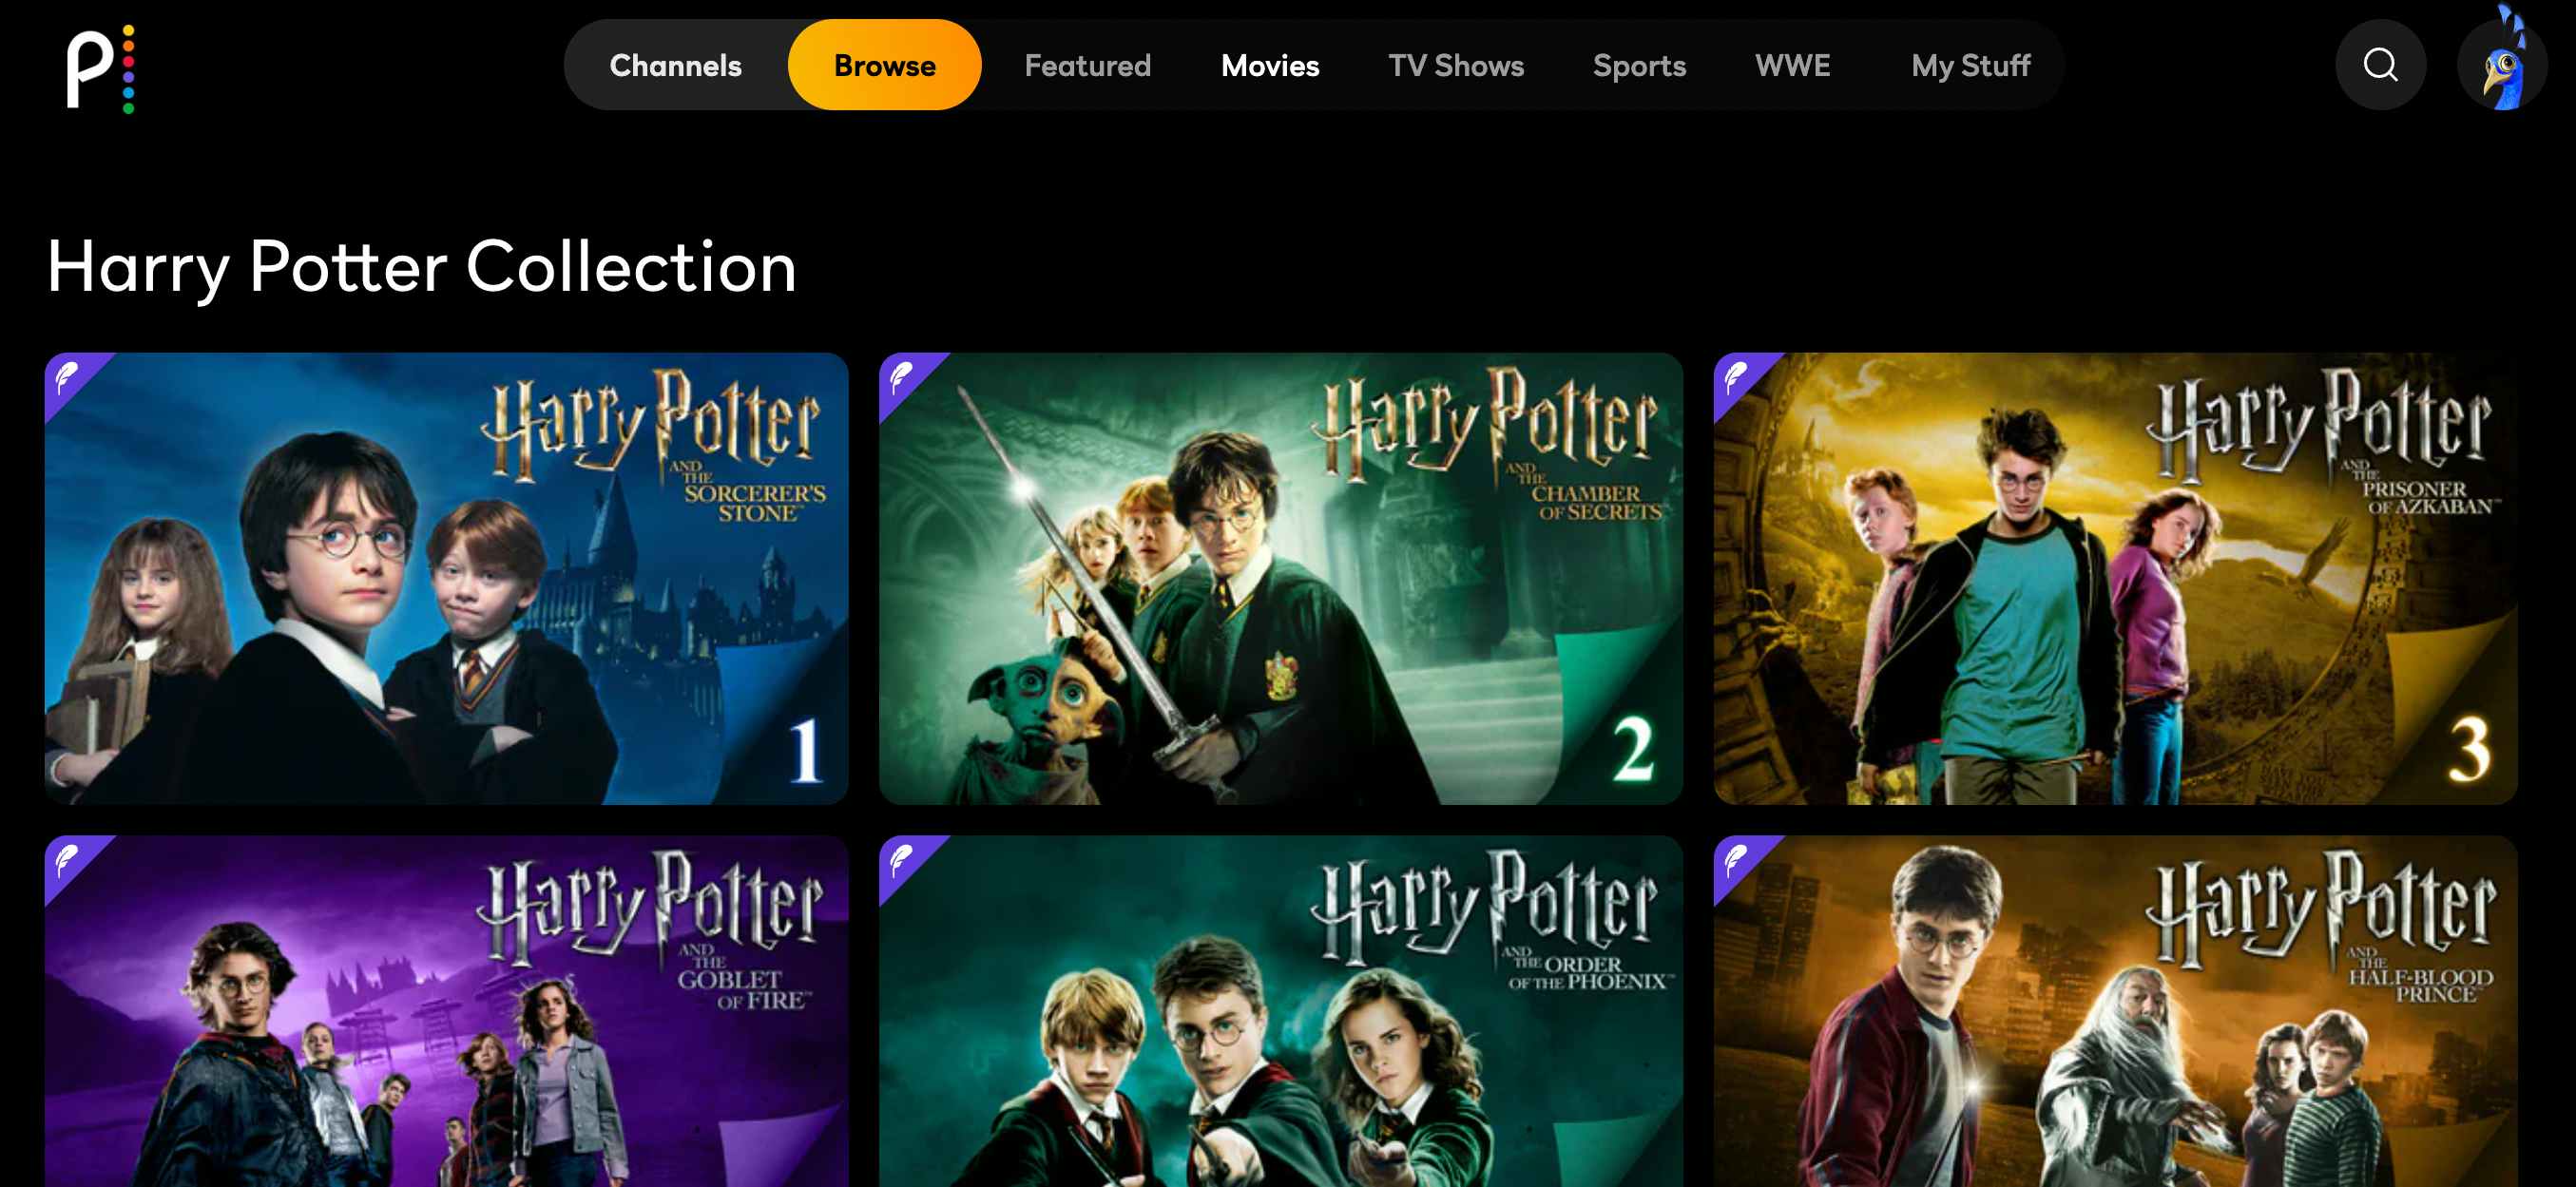 peacock tv harry potter collection page screenshot